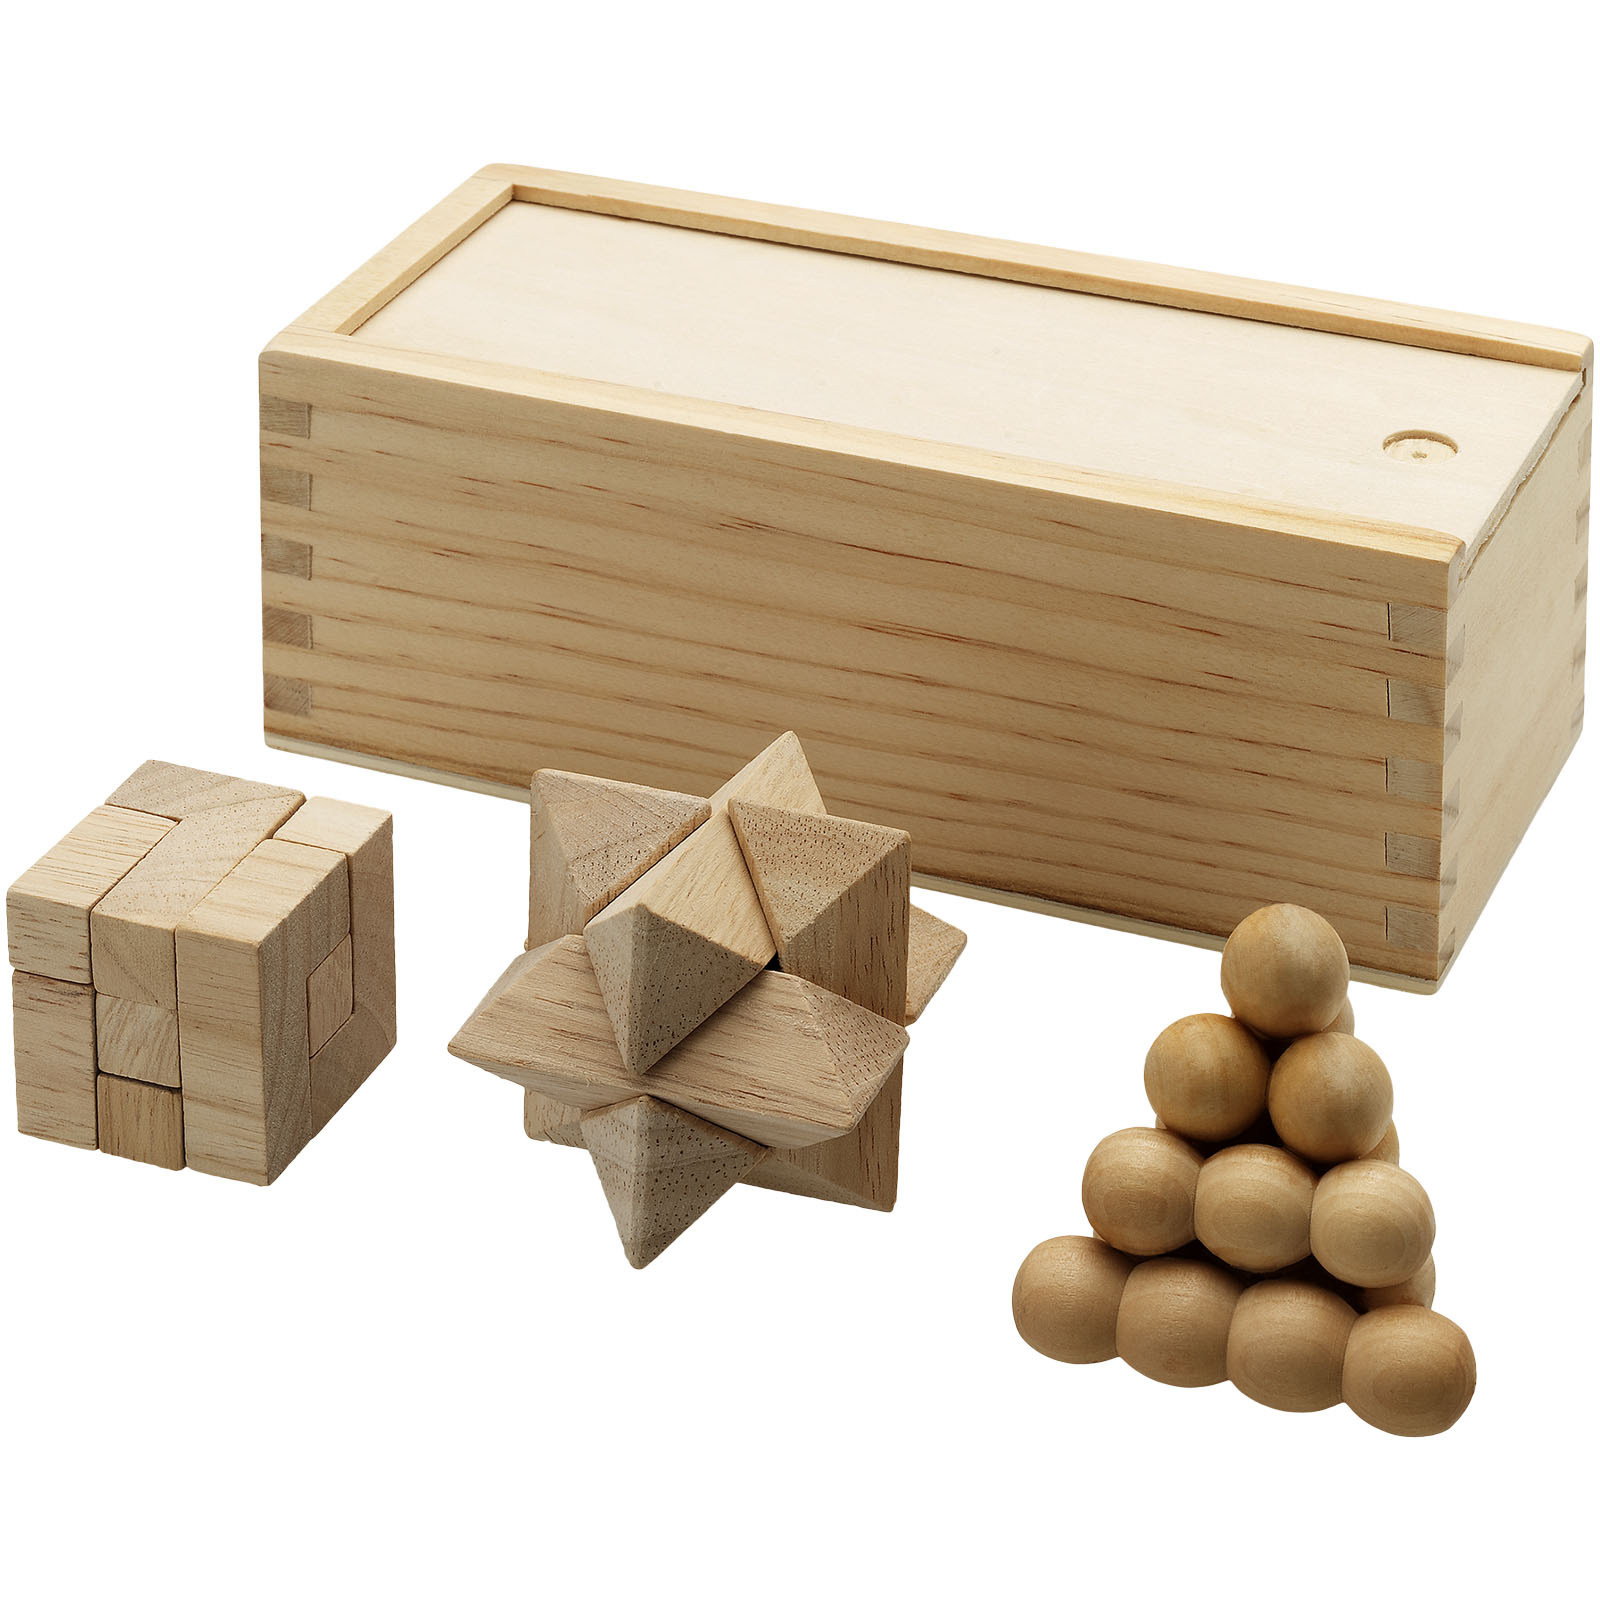 Set of three wooden puzzles DINT in wooden box - natural